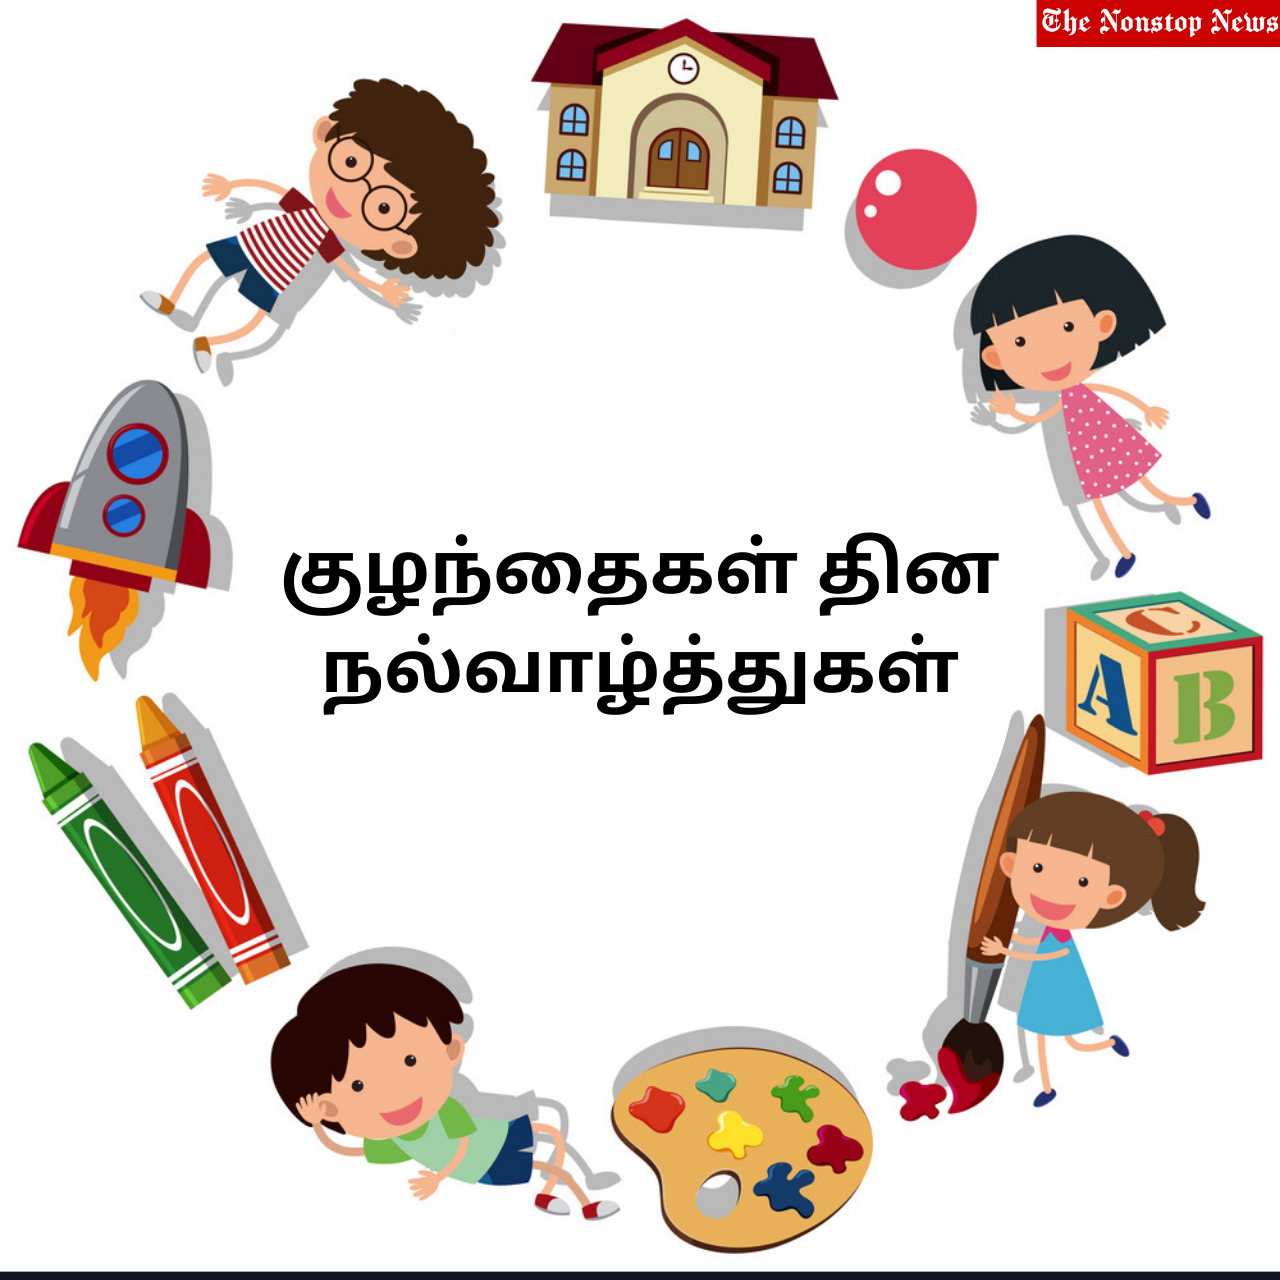 Happy Children's Day 2021 Tamil and Malayalam Wishes, Quotes, Greetings, Messages, and Status to Share